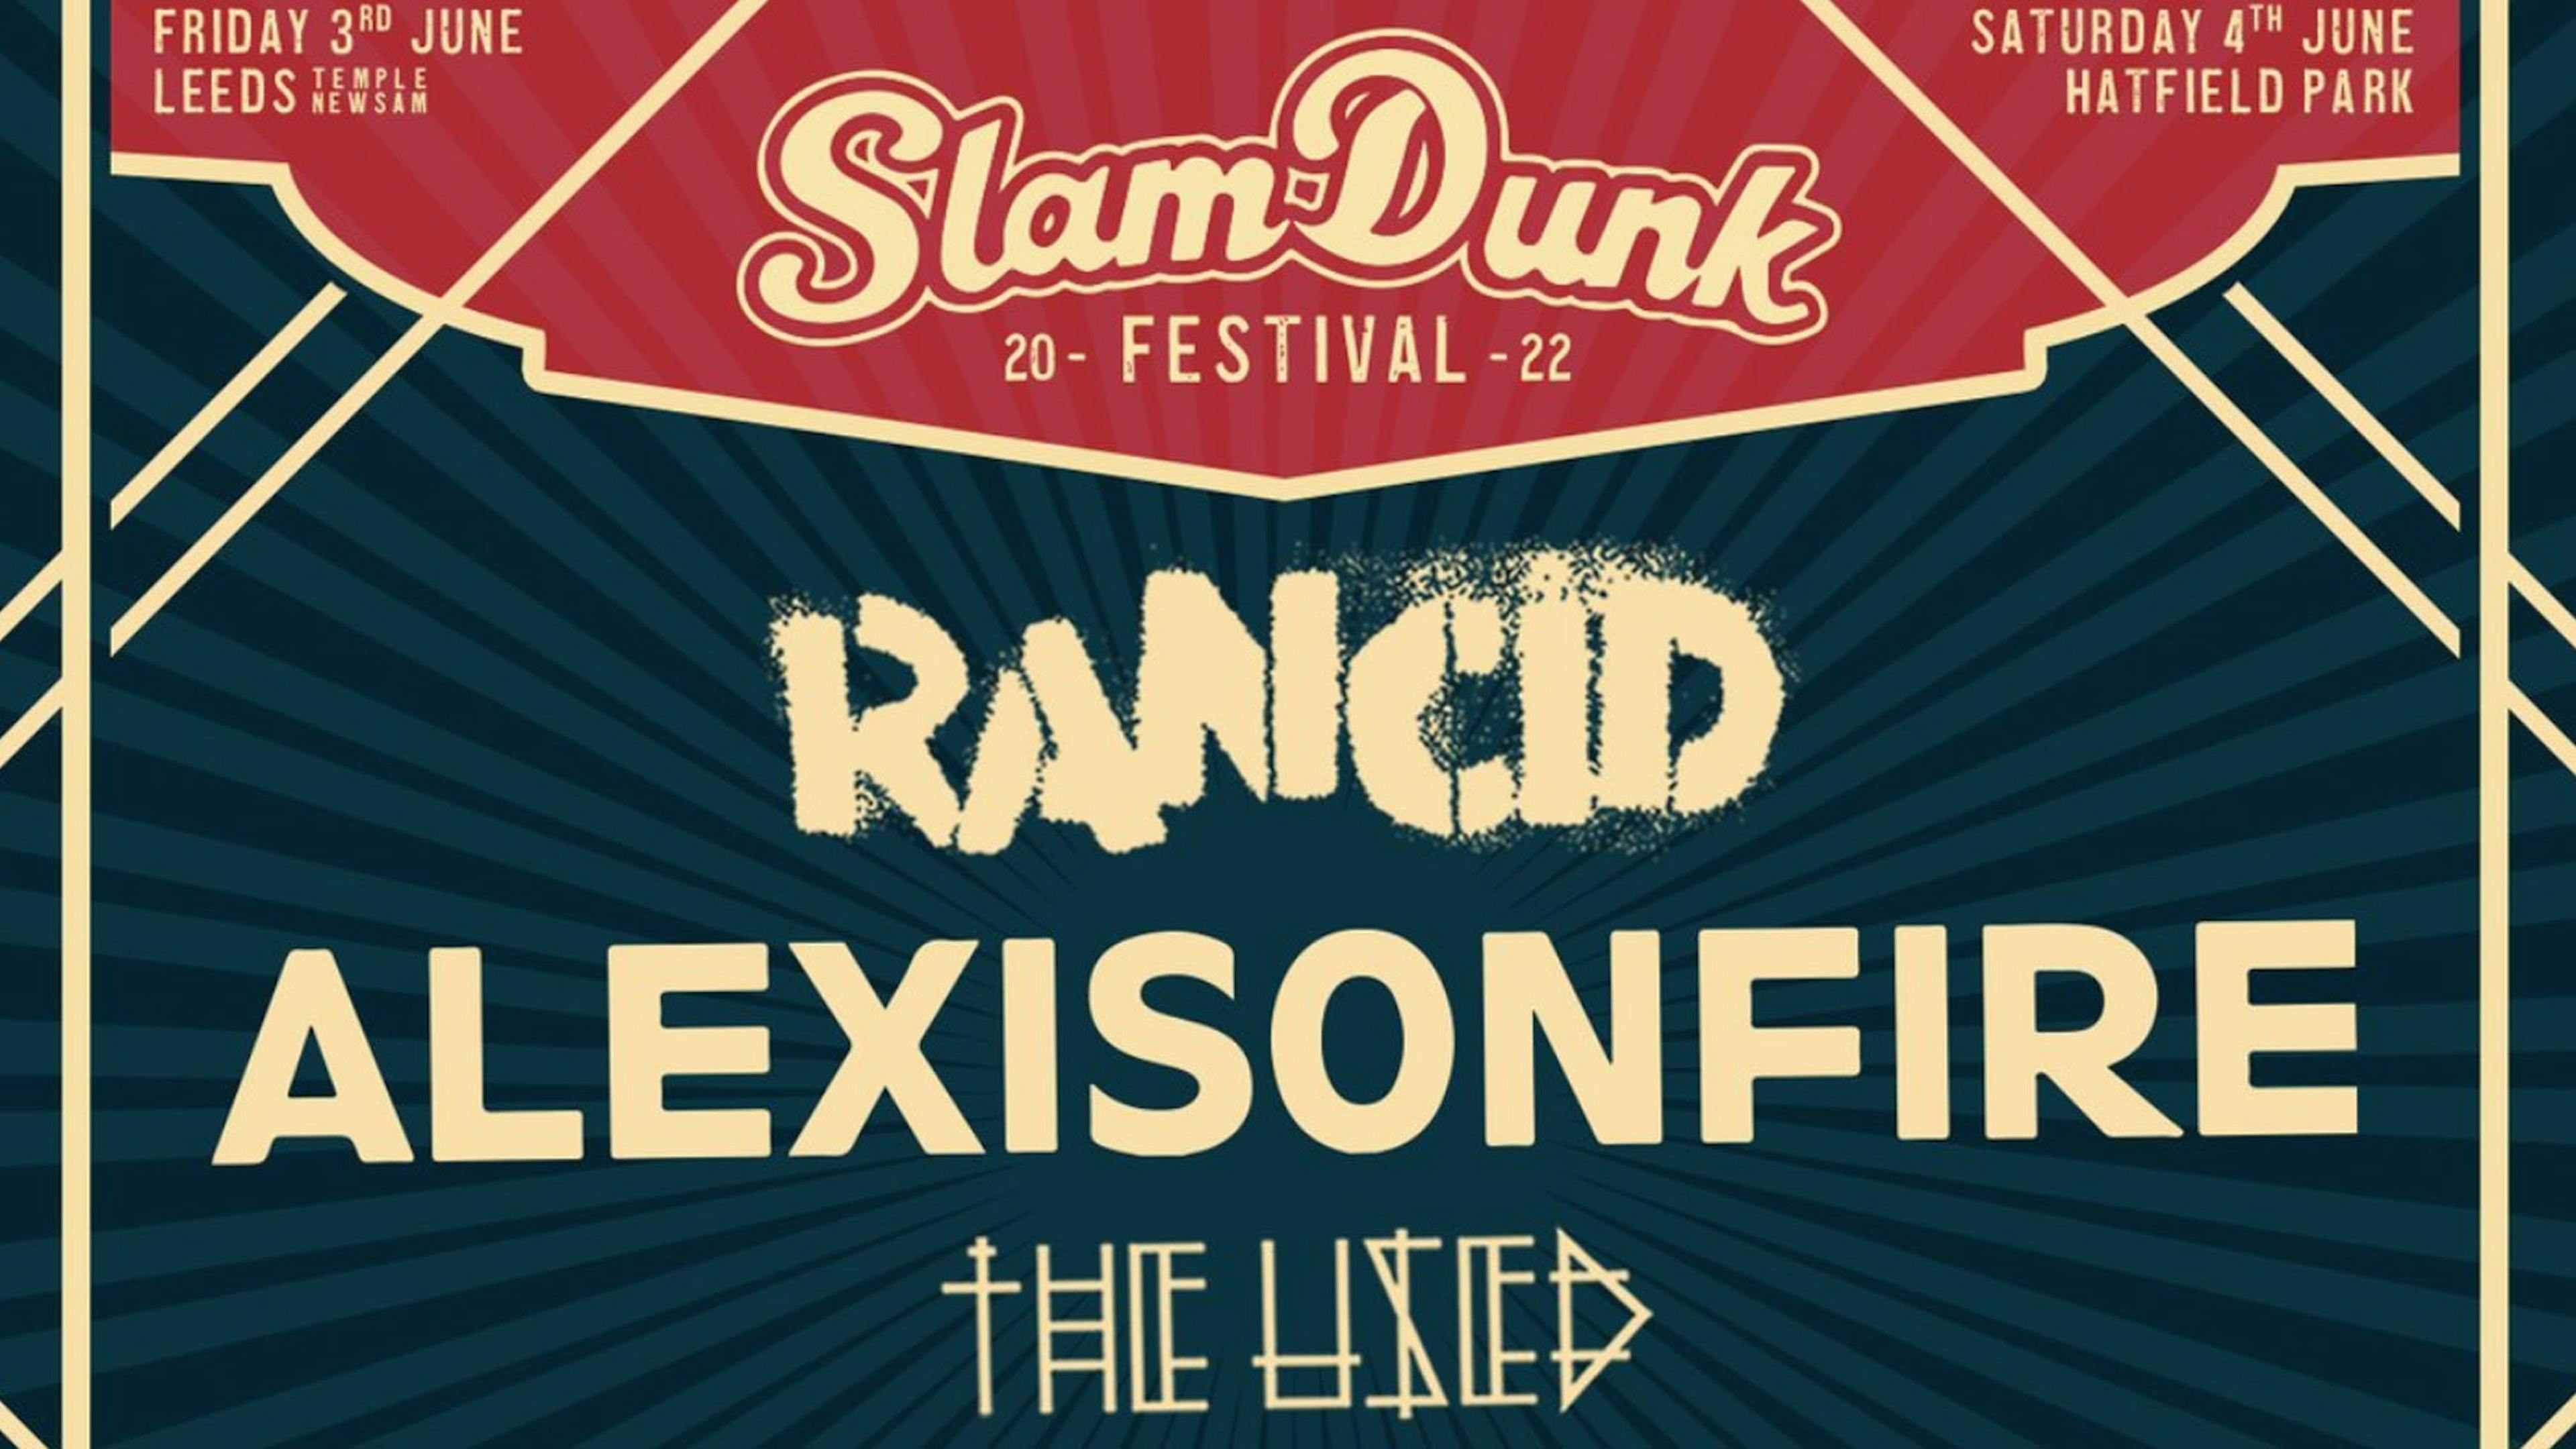 Slam Dunk unveil first 2022 names including headliners Alexisonfire and Rancid